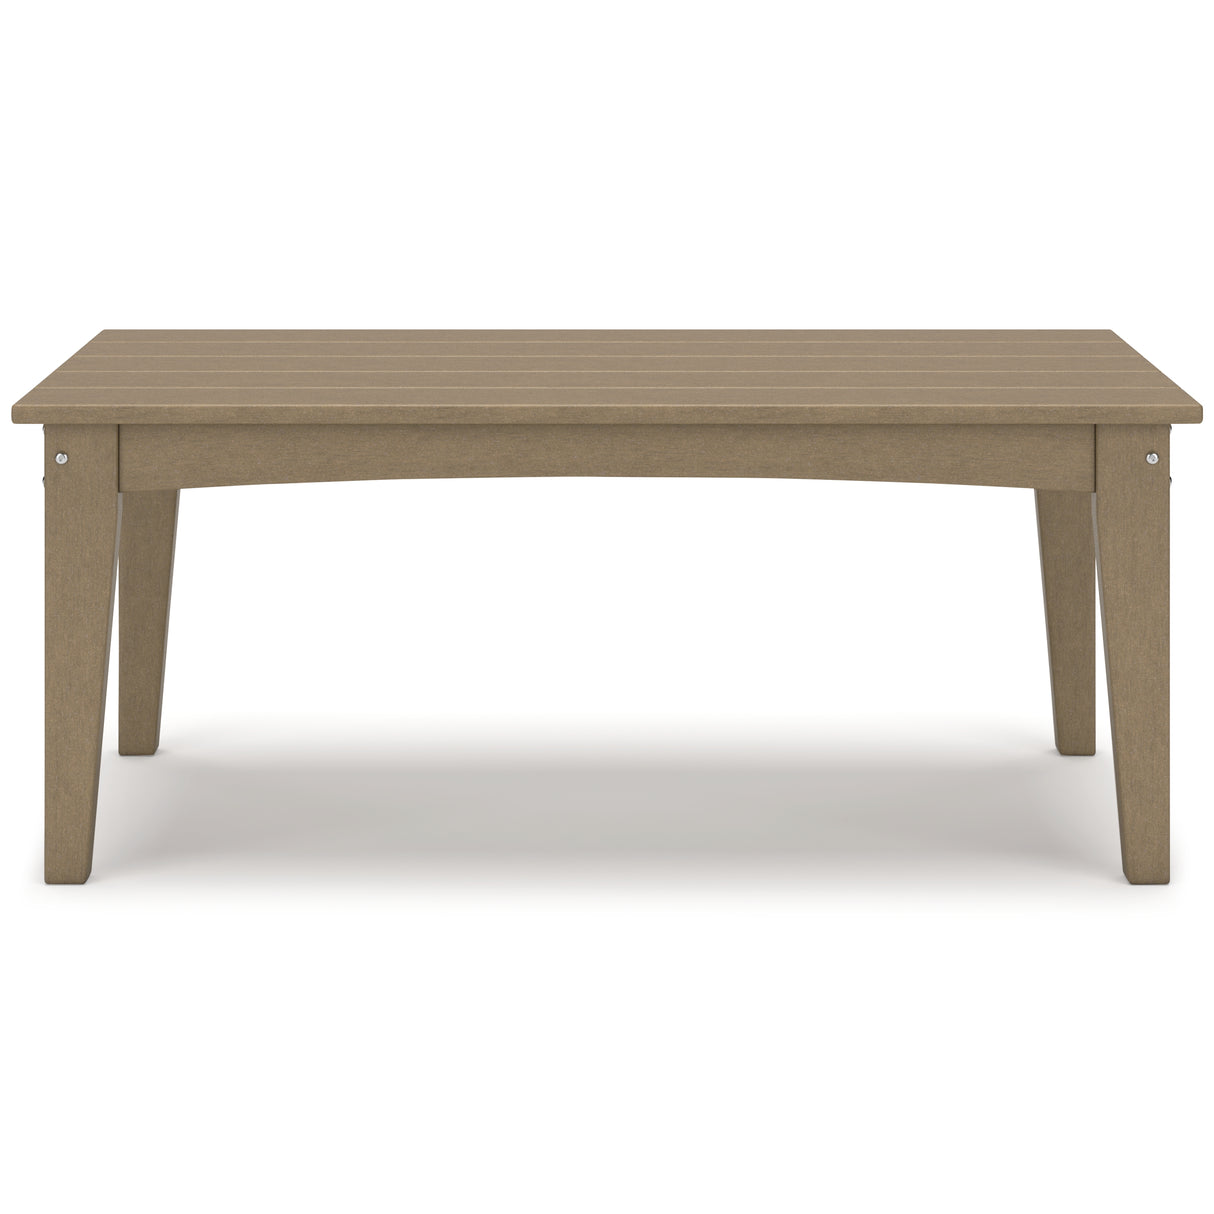 Hyland wave Driftwood Outdoor Coffee Table - P114-701 - Luna Furniture